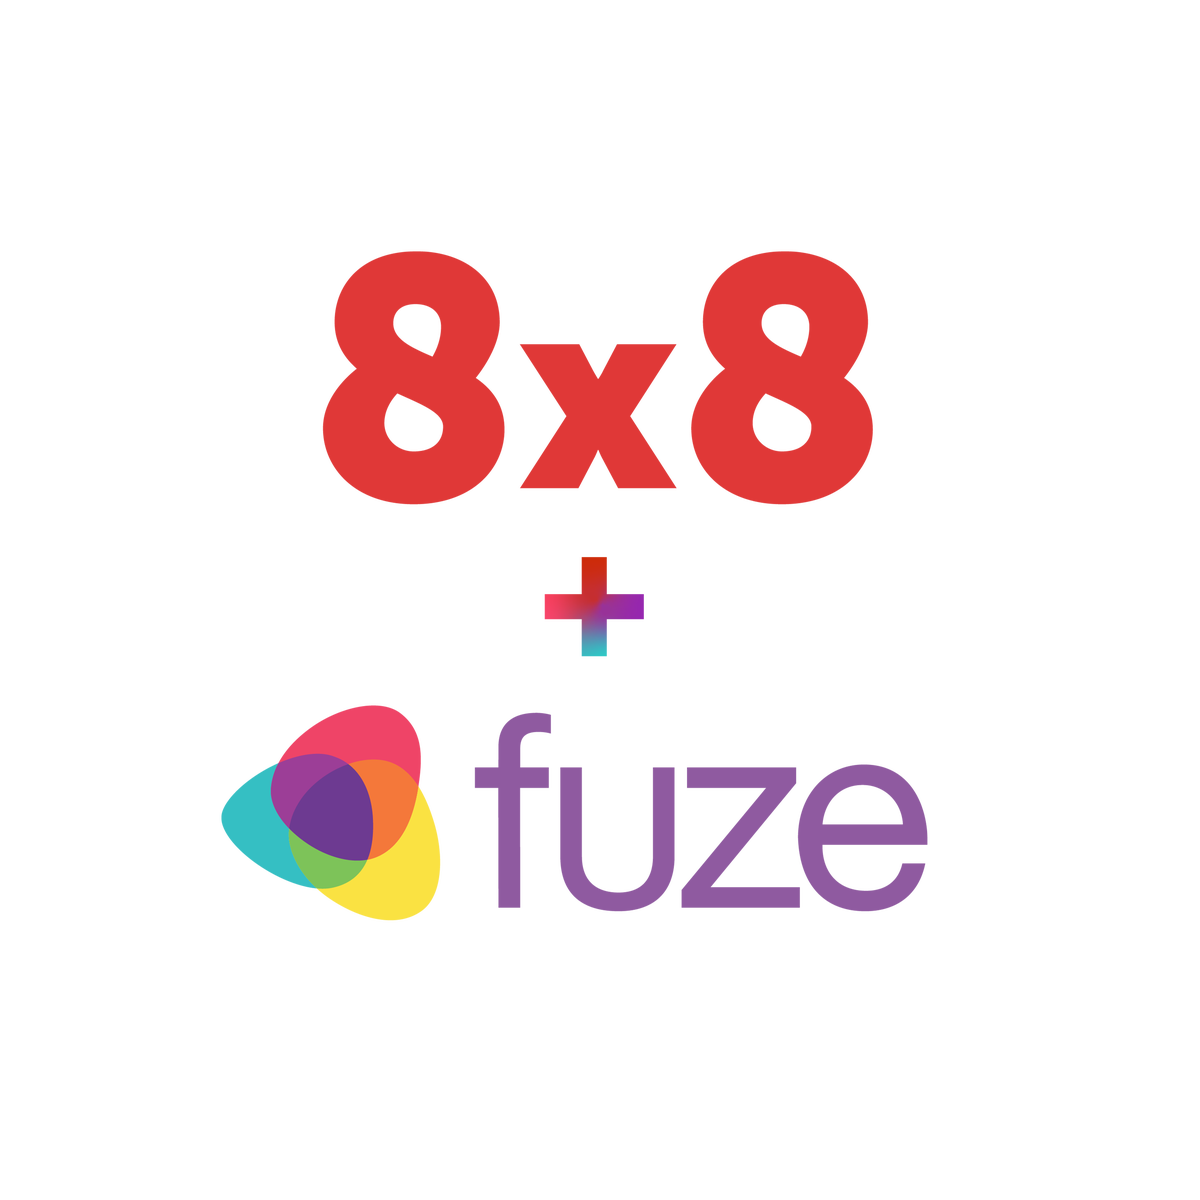 8x8_fuze_stacked_purple_(final).png